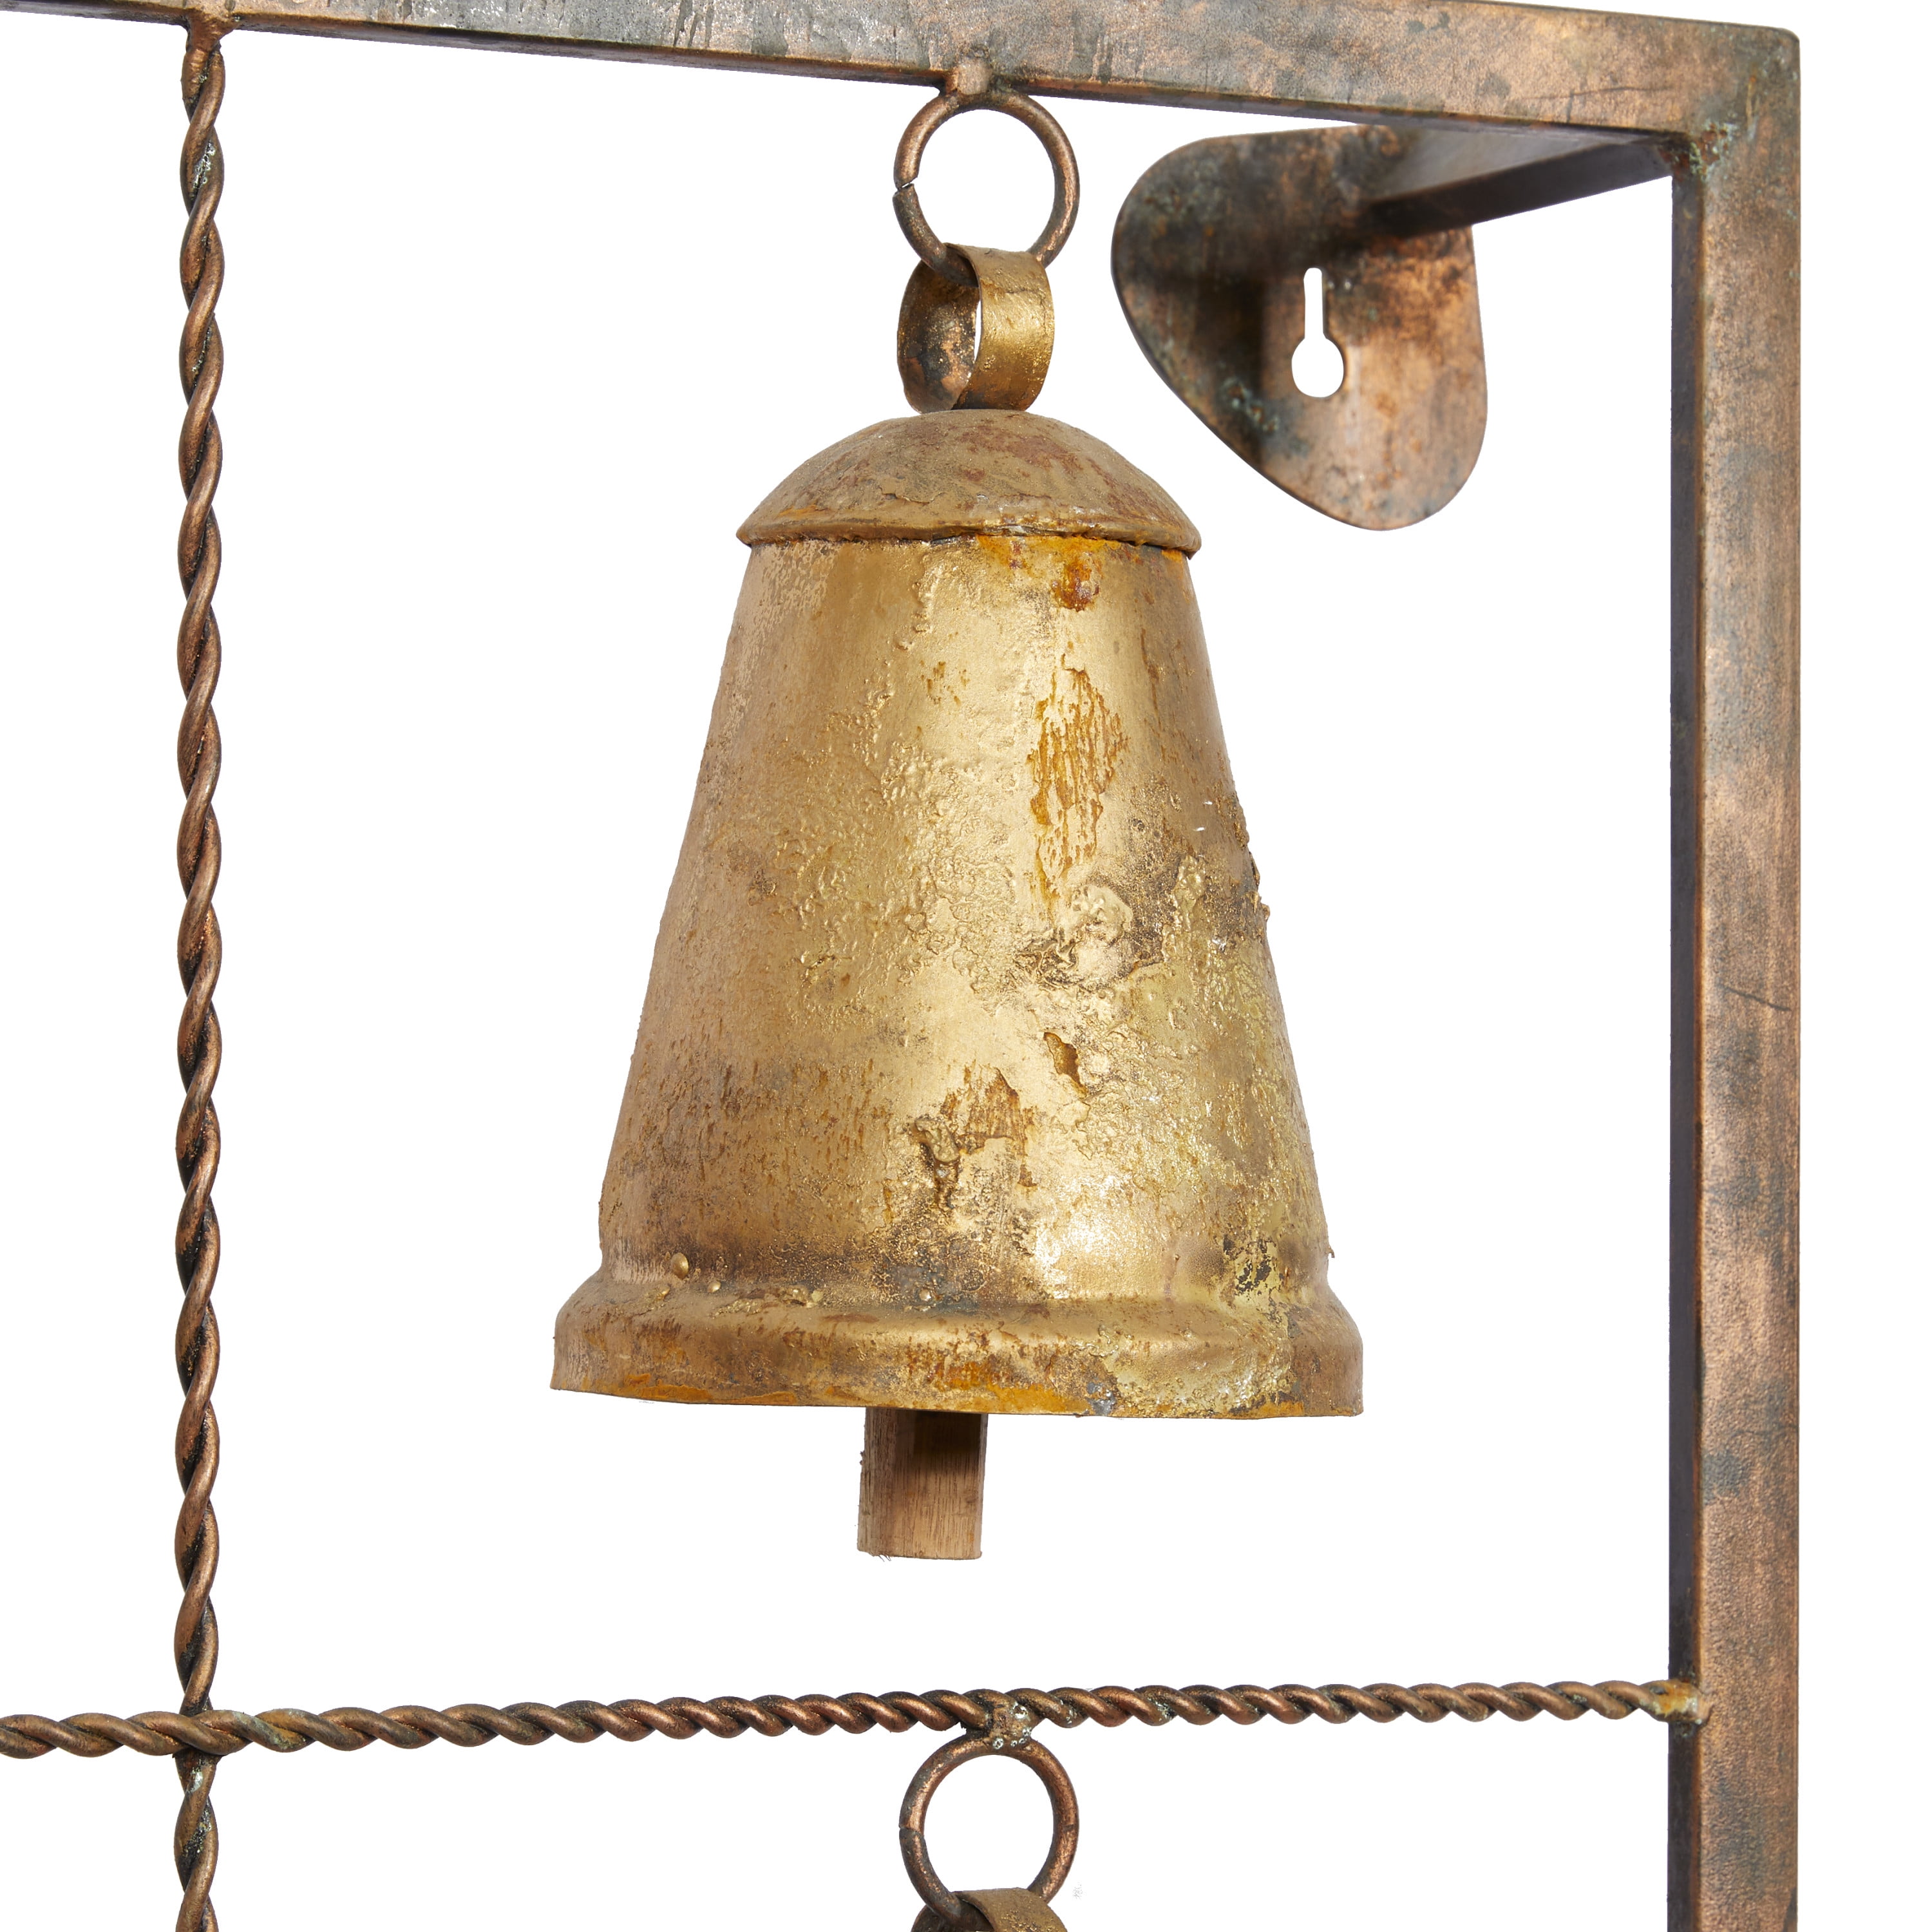 Where to Find Studio McGee's Vintage Hanging Bells for a Fraction